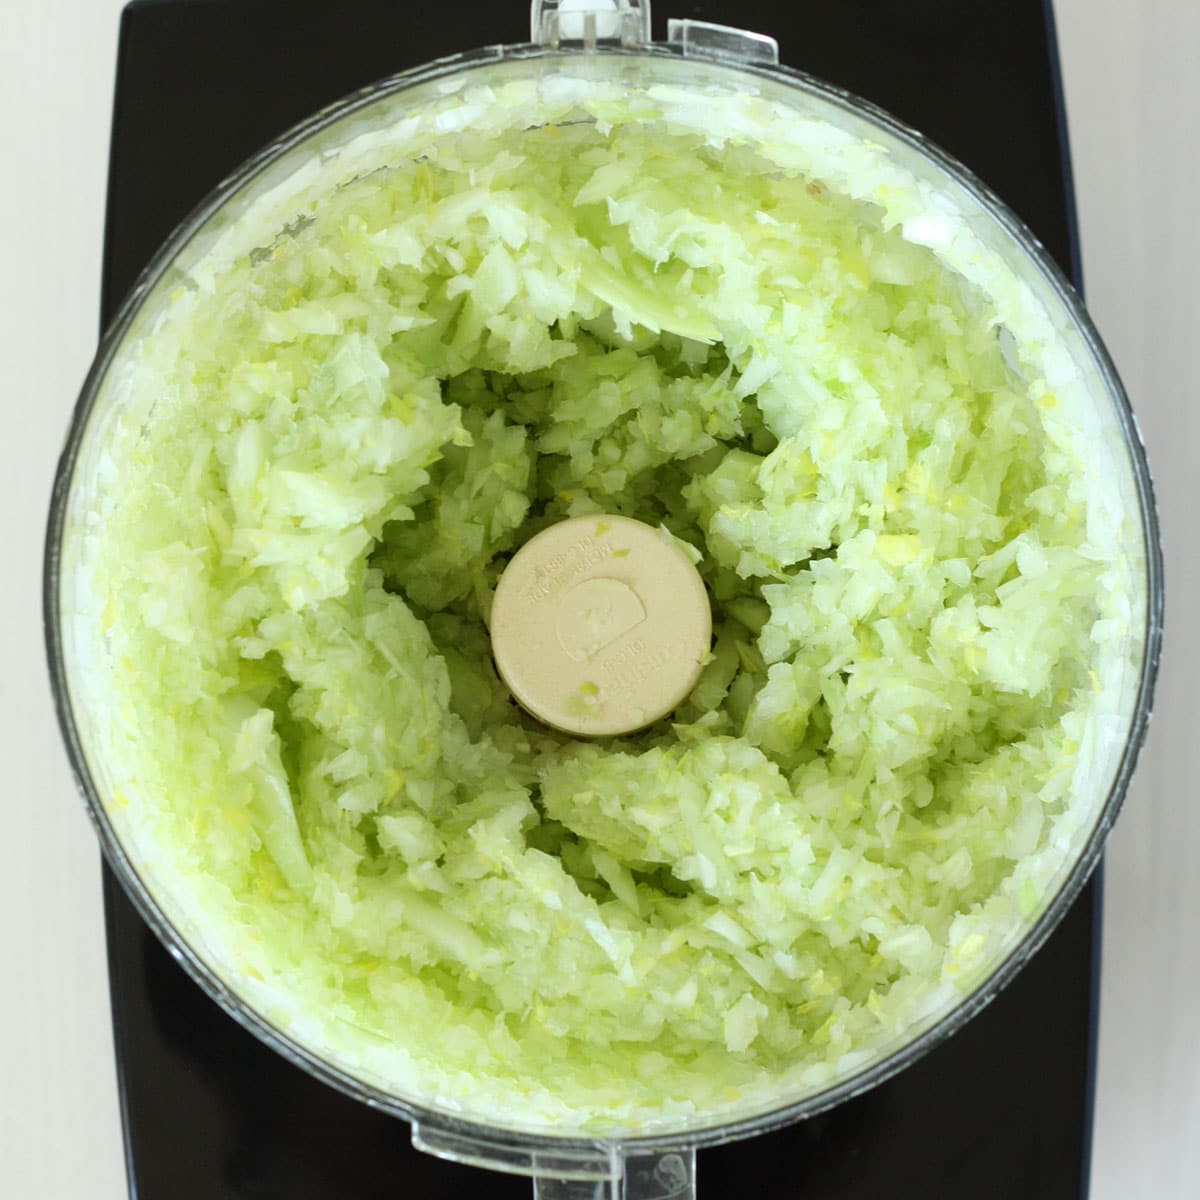 minced onion and celery in a food processor